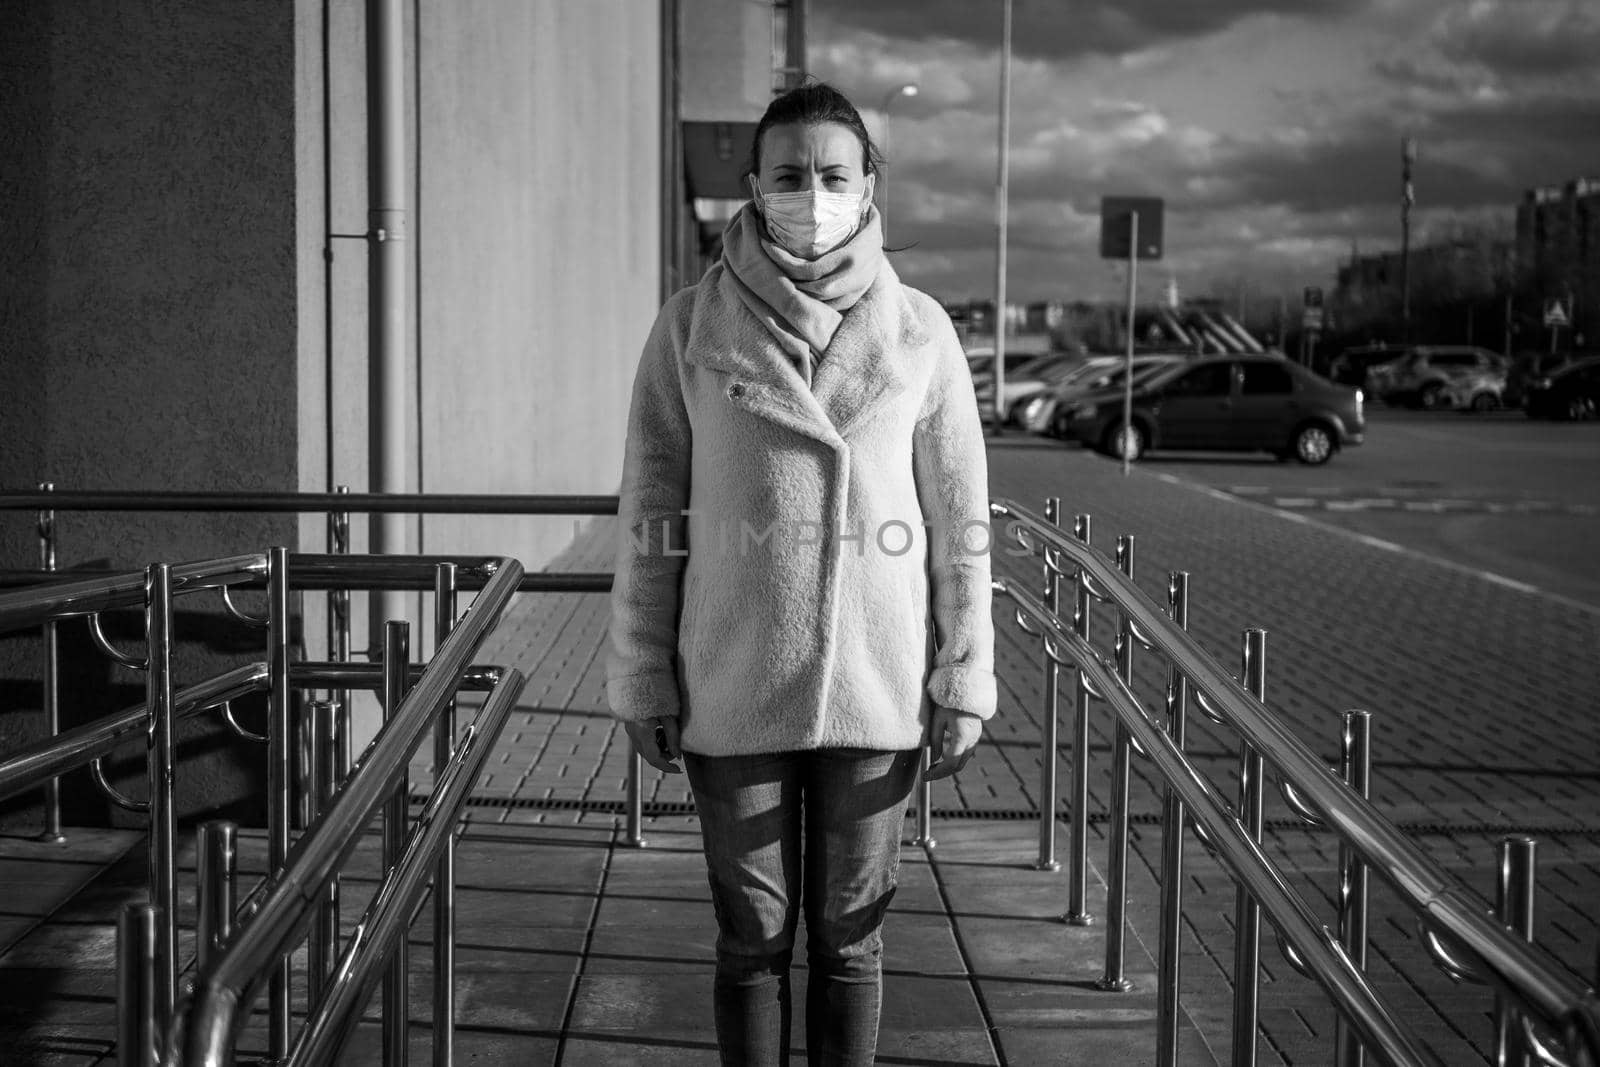 A picture of a girl in a mask. On the street. isolated Covid-19 pandemic.